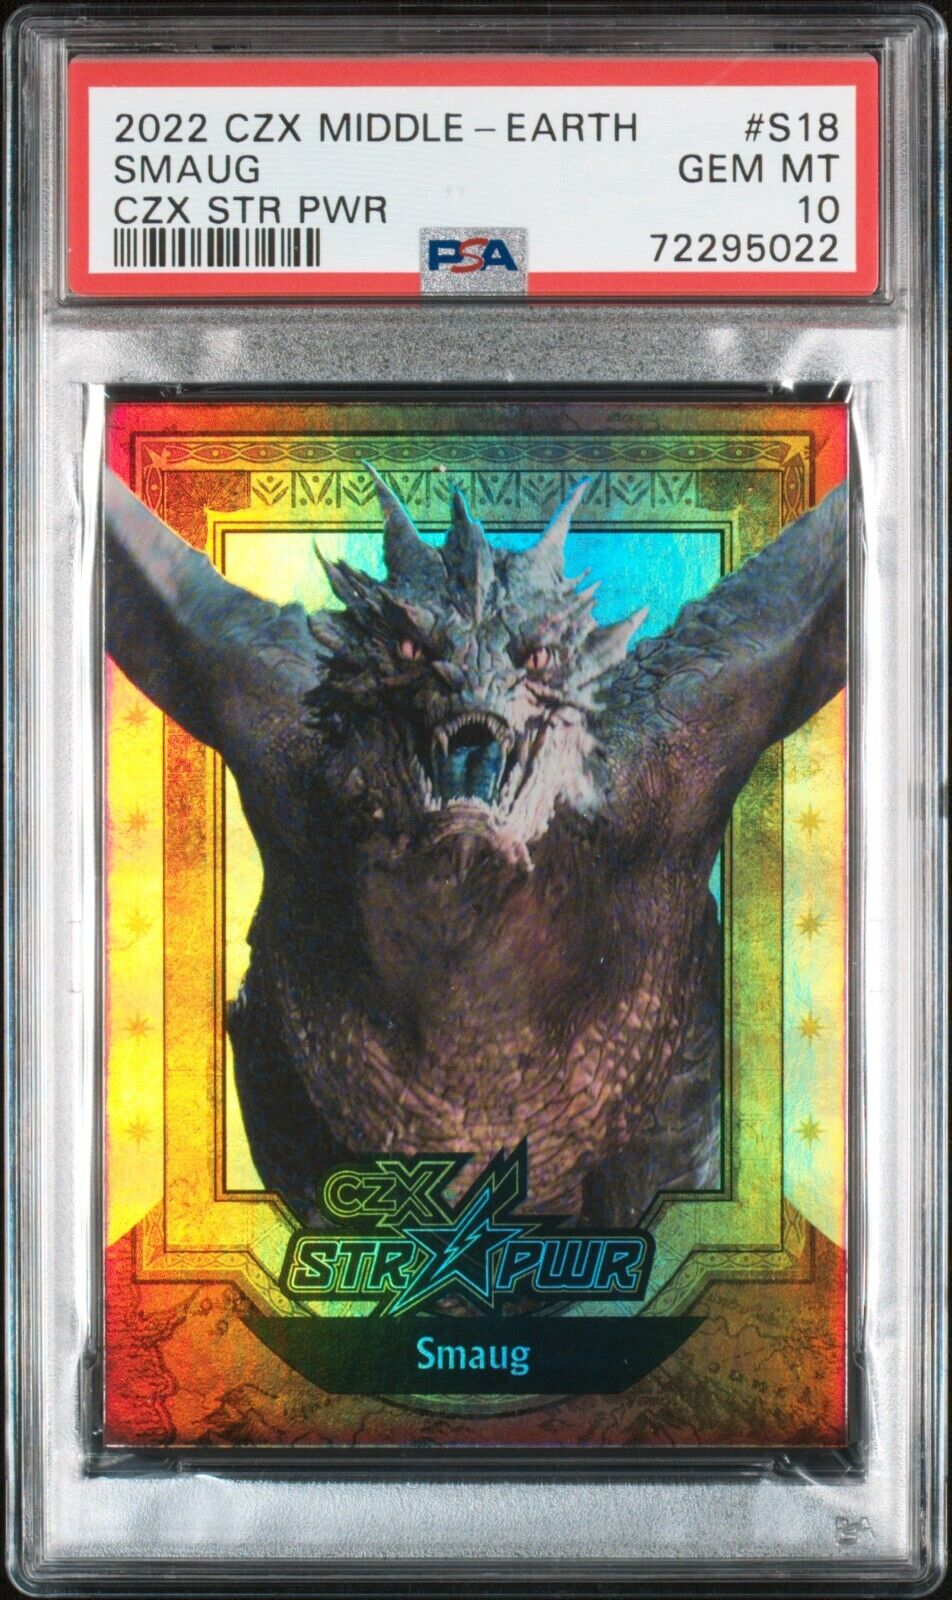 PSA 10 Gem Mint Smaug #S18 Red CZX Middle Earthch Cryptozoic